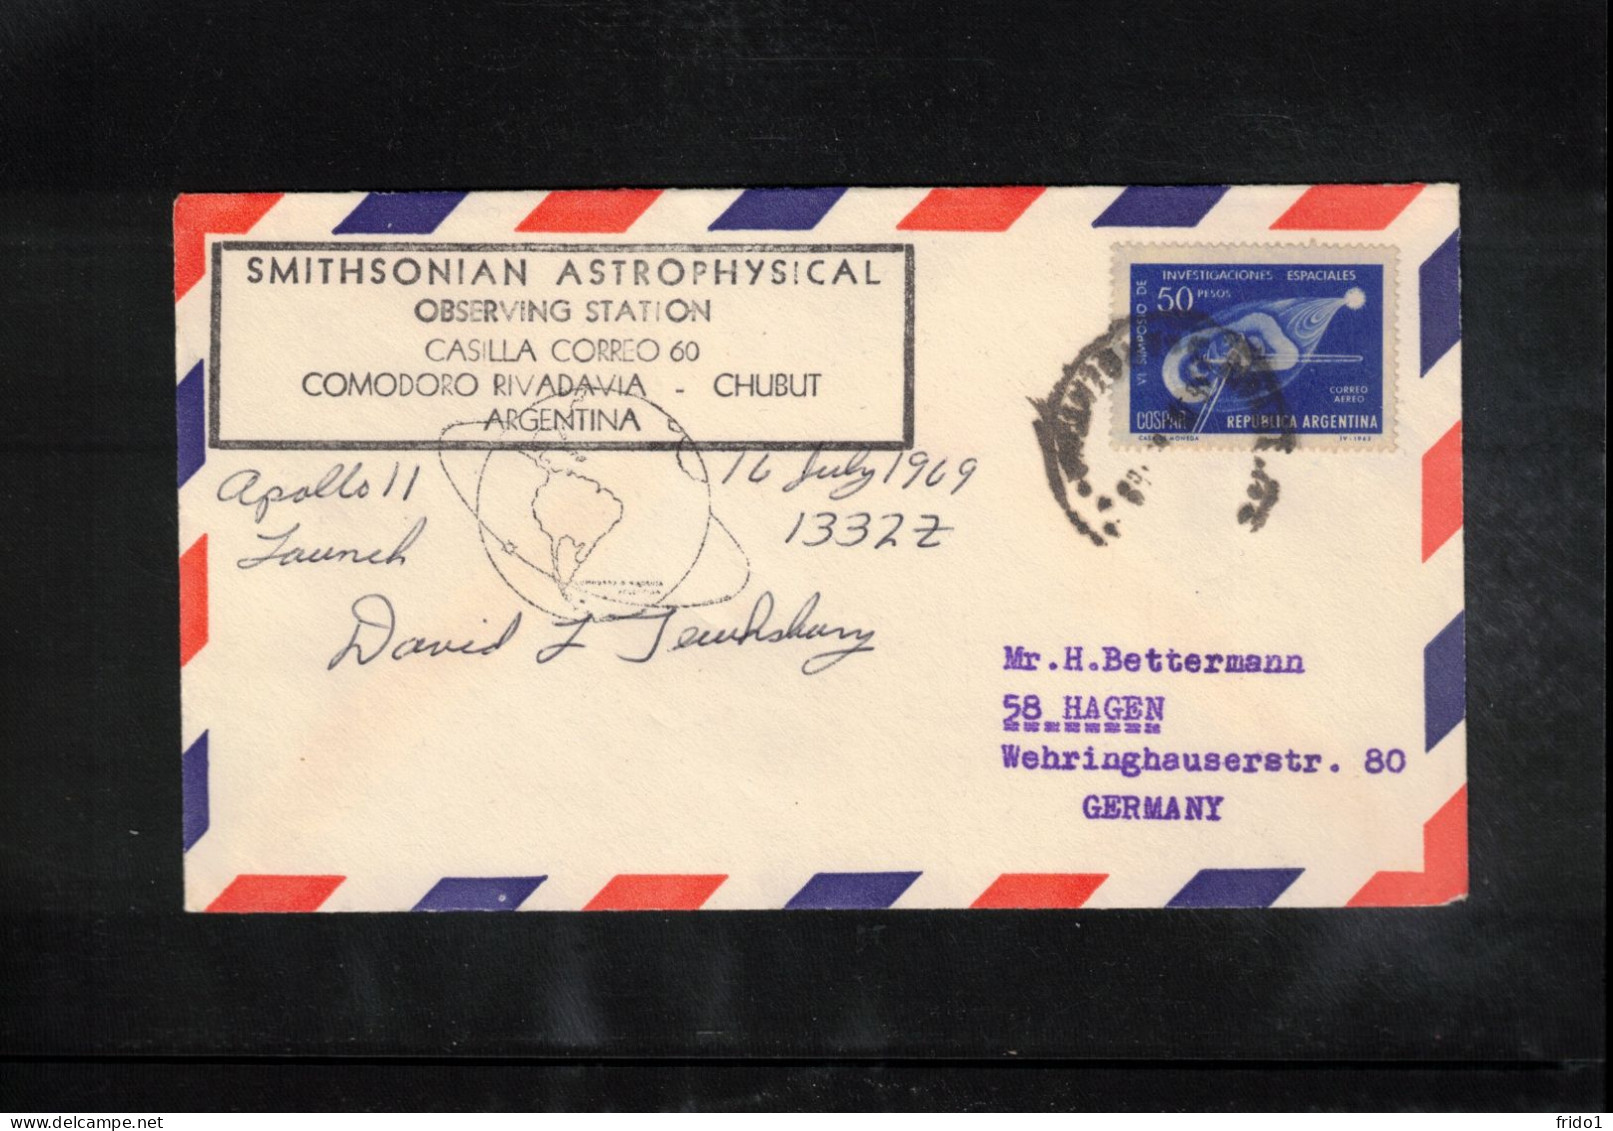 USA 1969 Space / Weltraum - Apollo XI - Smithsonian Astrophysical Observation Station Argentina Interesting Cover - United States